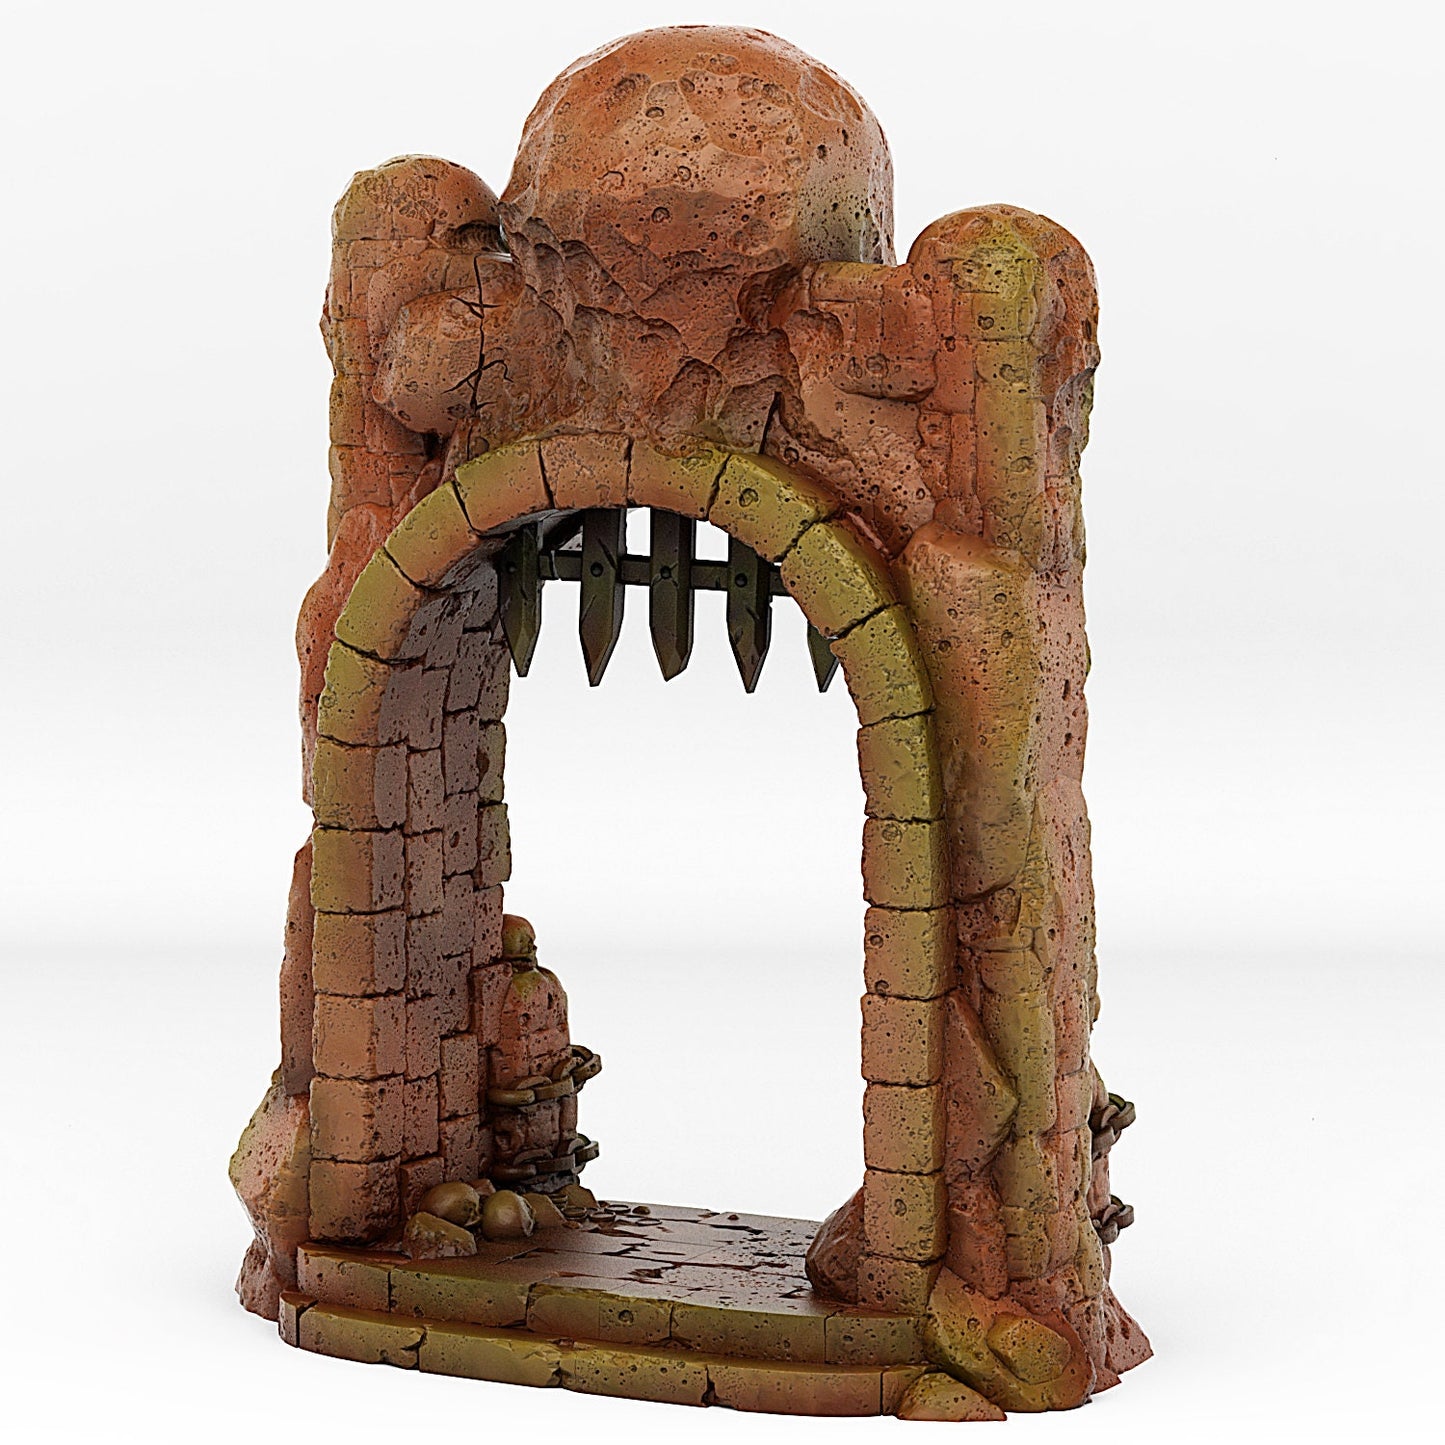 Dungeon Entrance Portal | Scenery and terrain | 3D Printed Resin Miniature | Tabletop Role Playing | AoS | D&D | 40K | Pathfinder